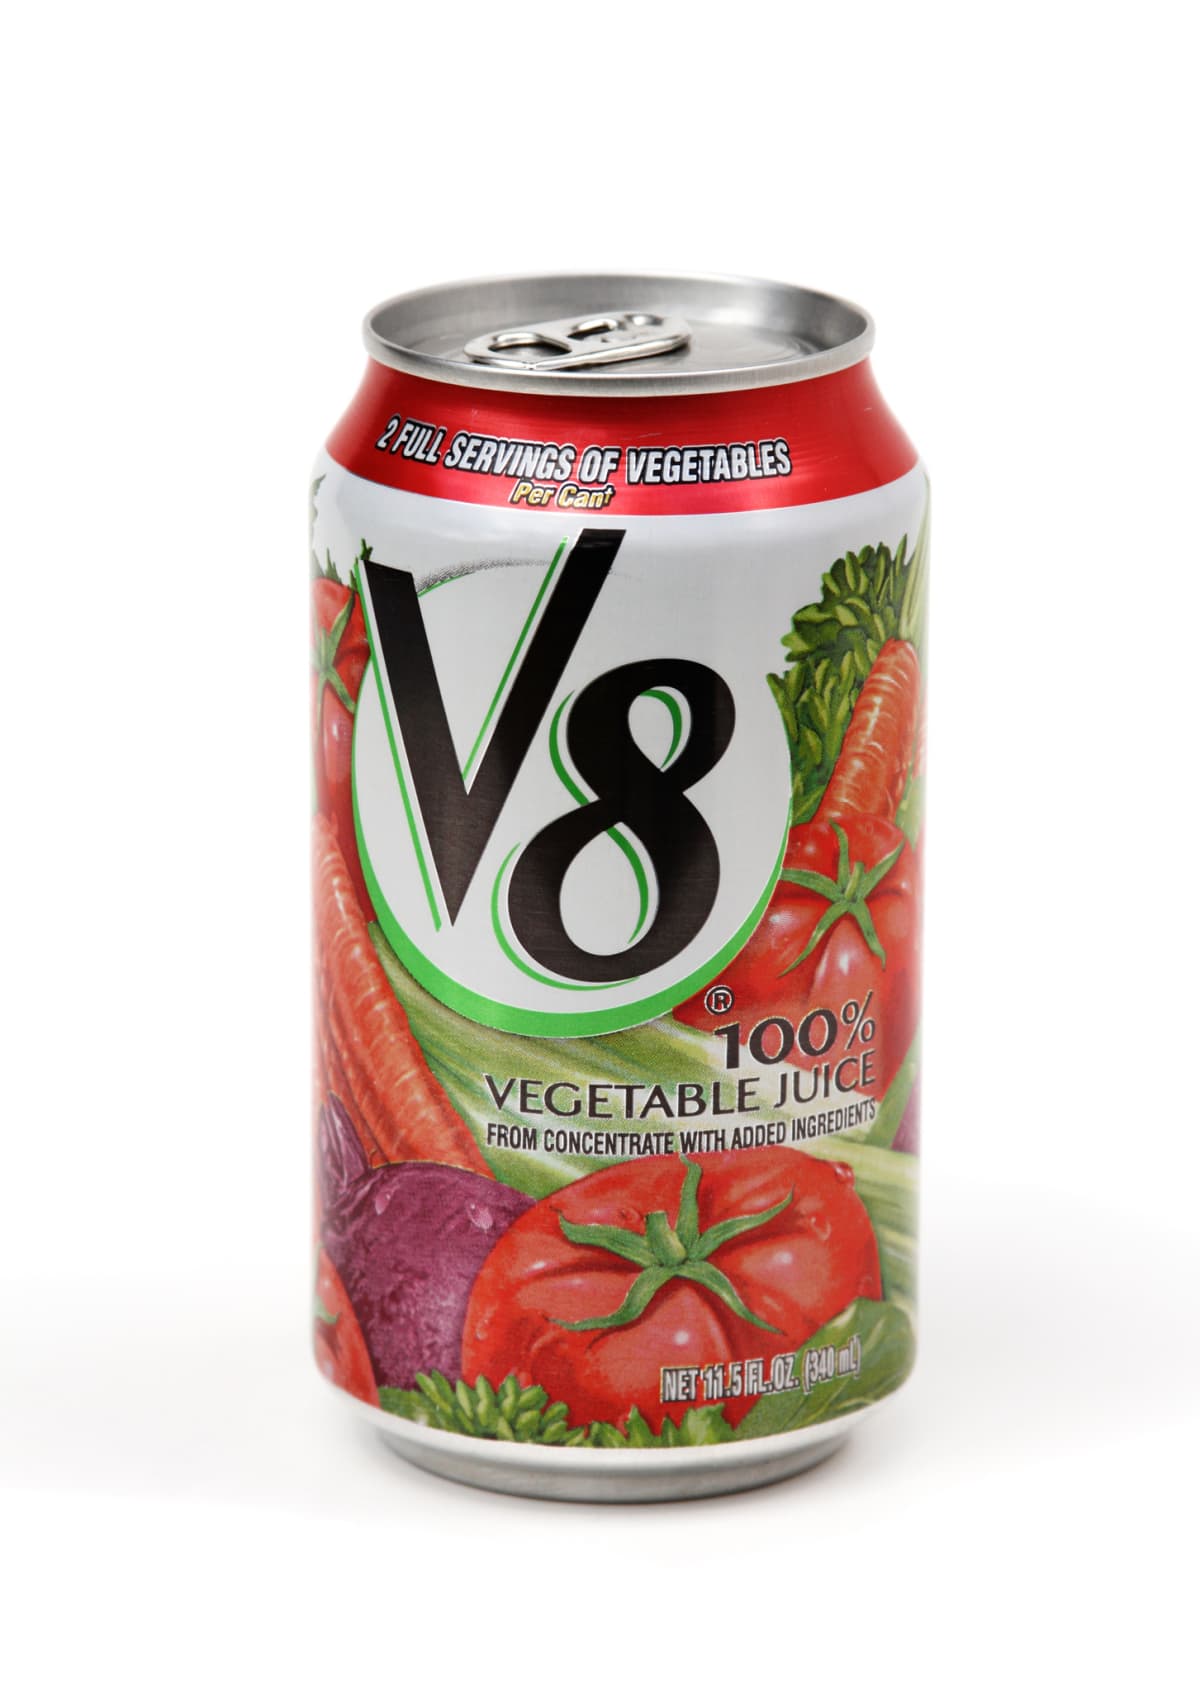 A can of V8 100% Vegetable Juice.